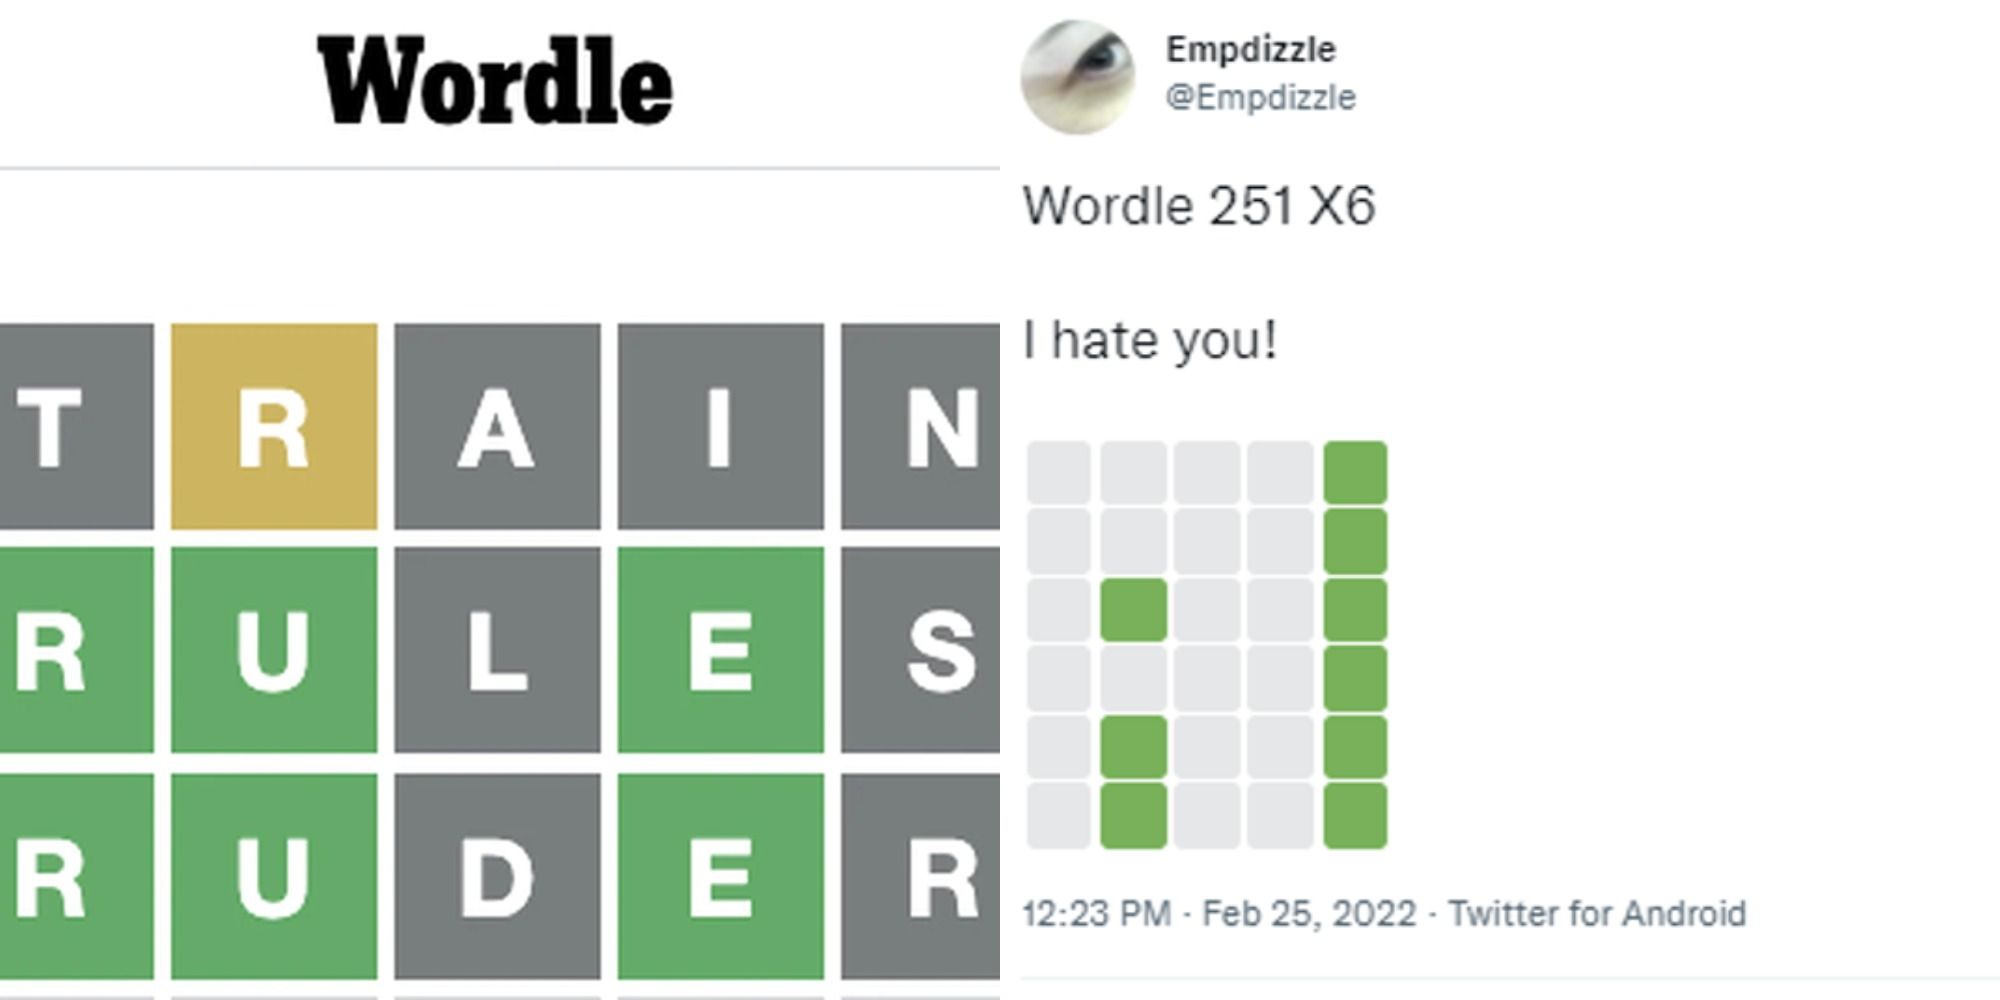 Split image showing a Wordle board and a tweet about the game